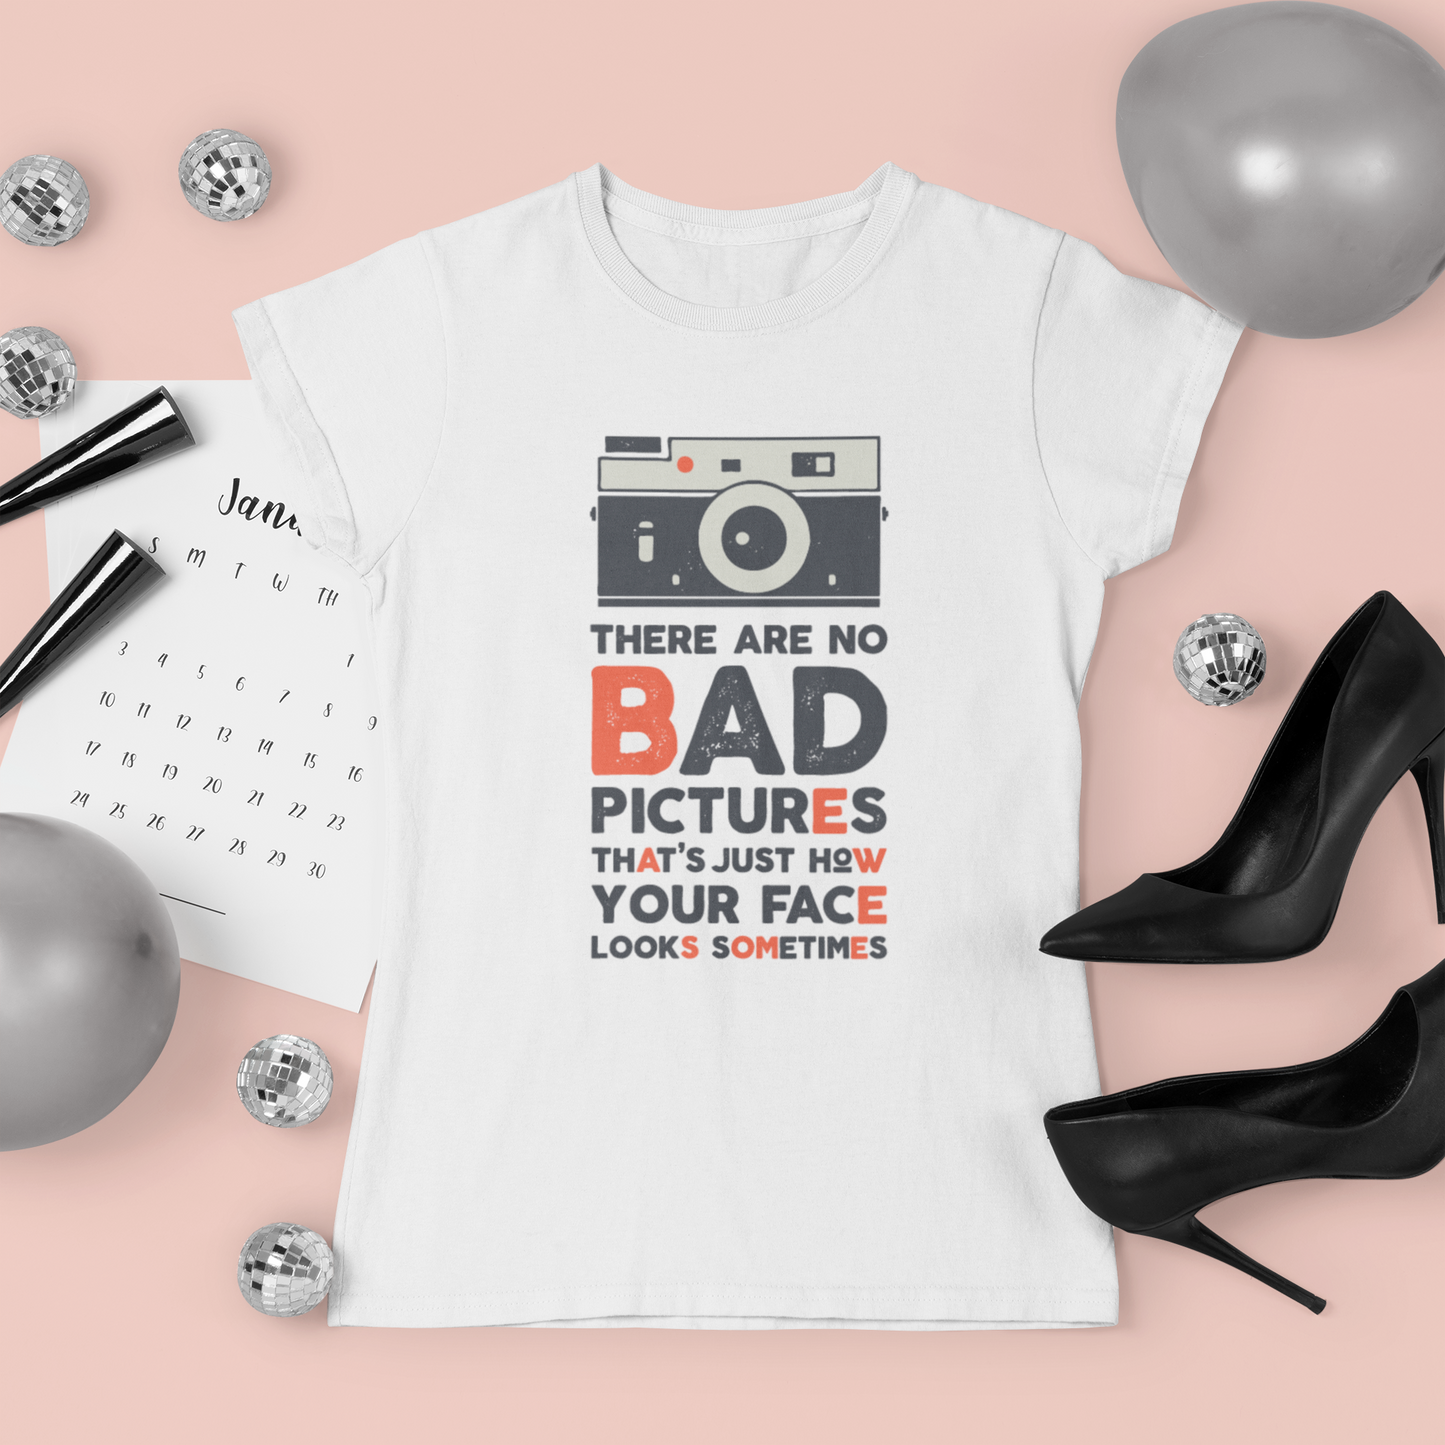 Women's "There Are No Bad Pictures" Tee